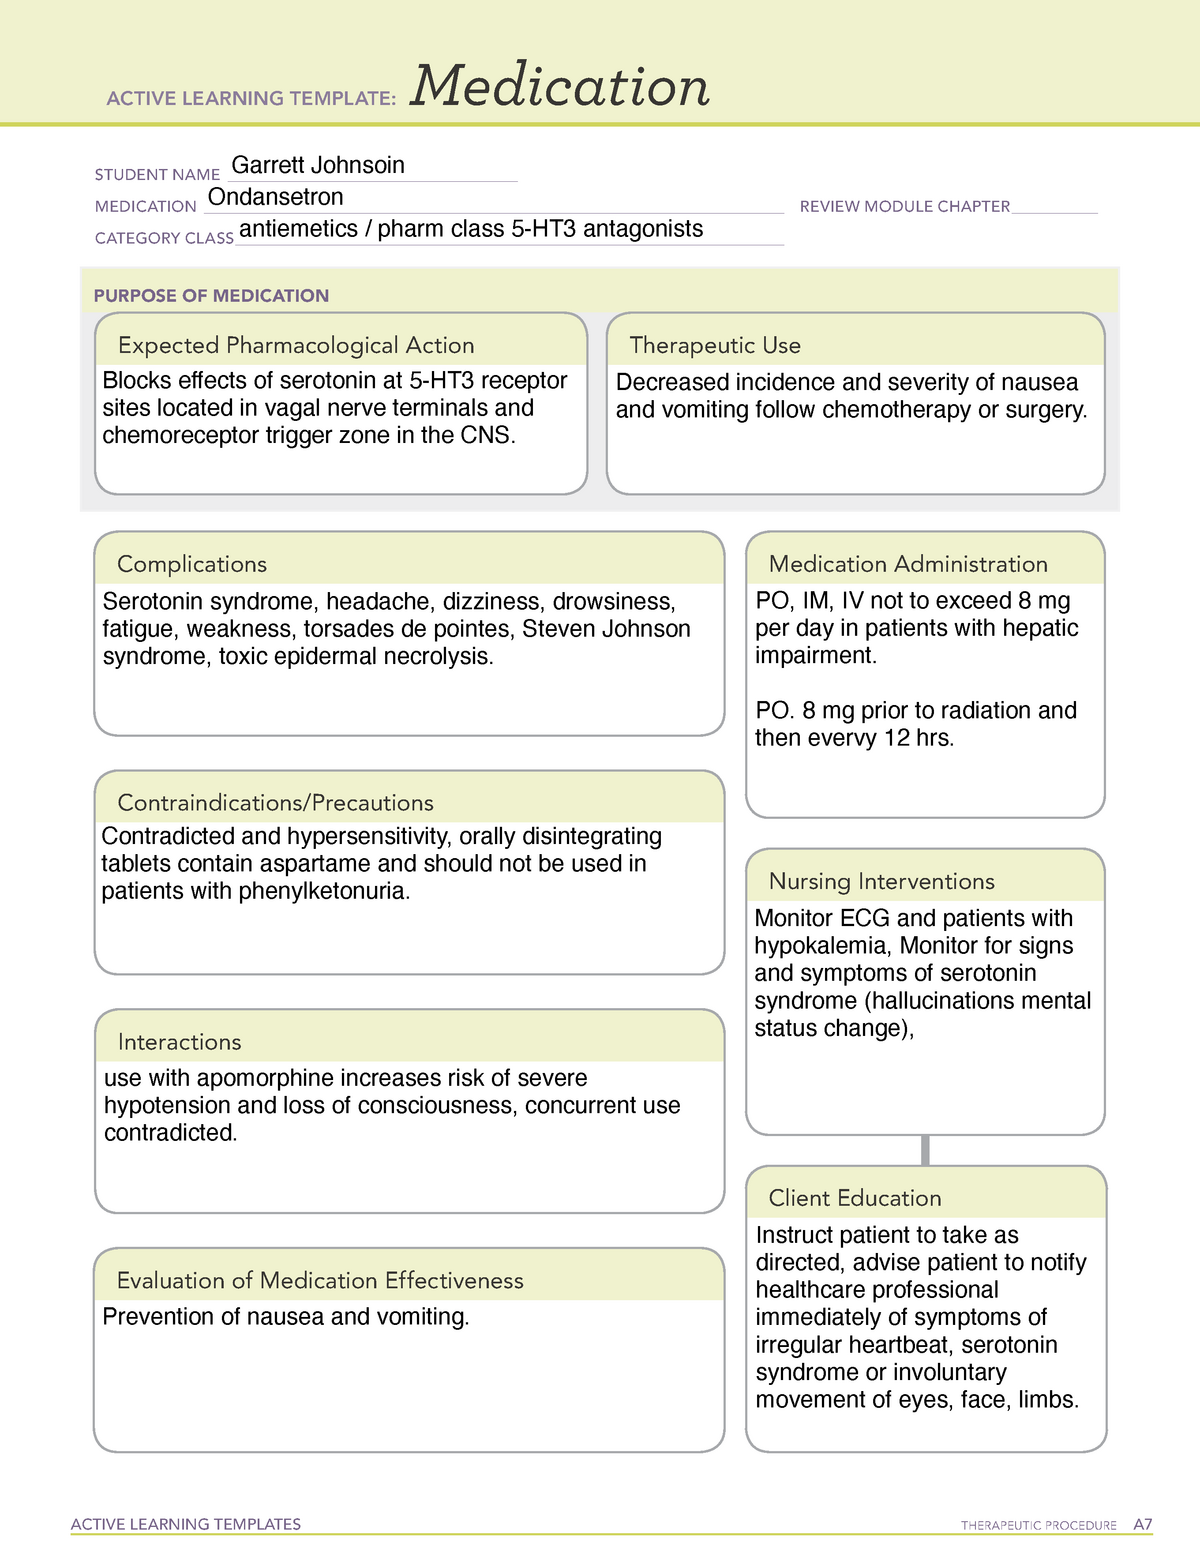 active-learning-template-medication-10-active-learning-templates-vrogue